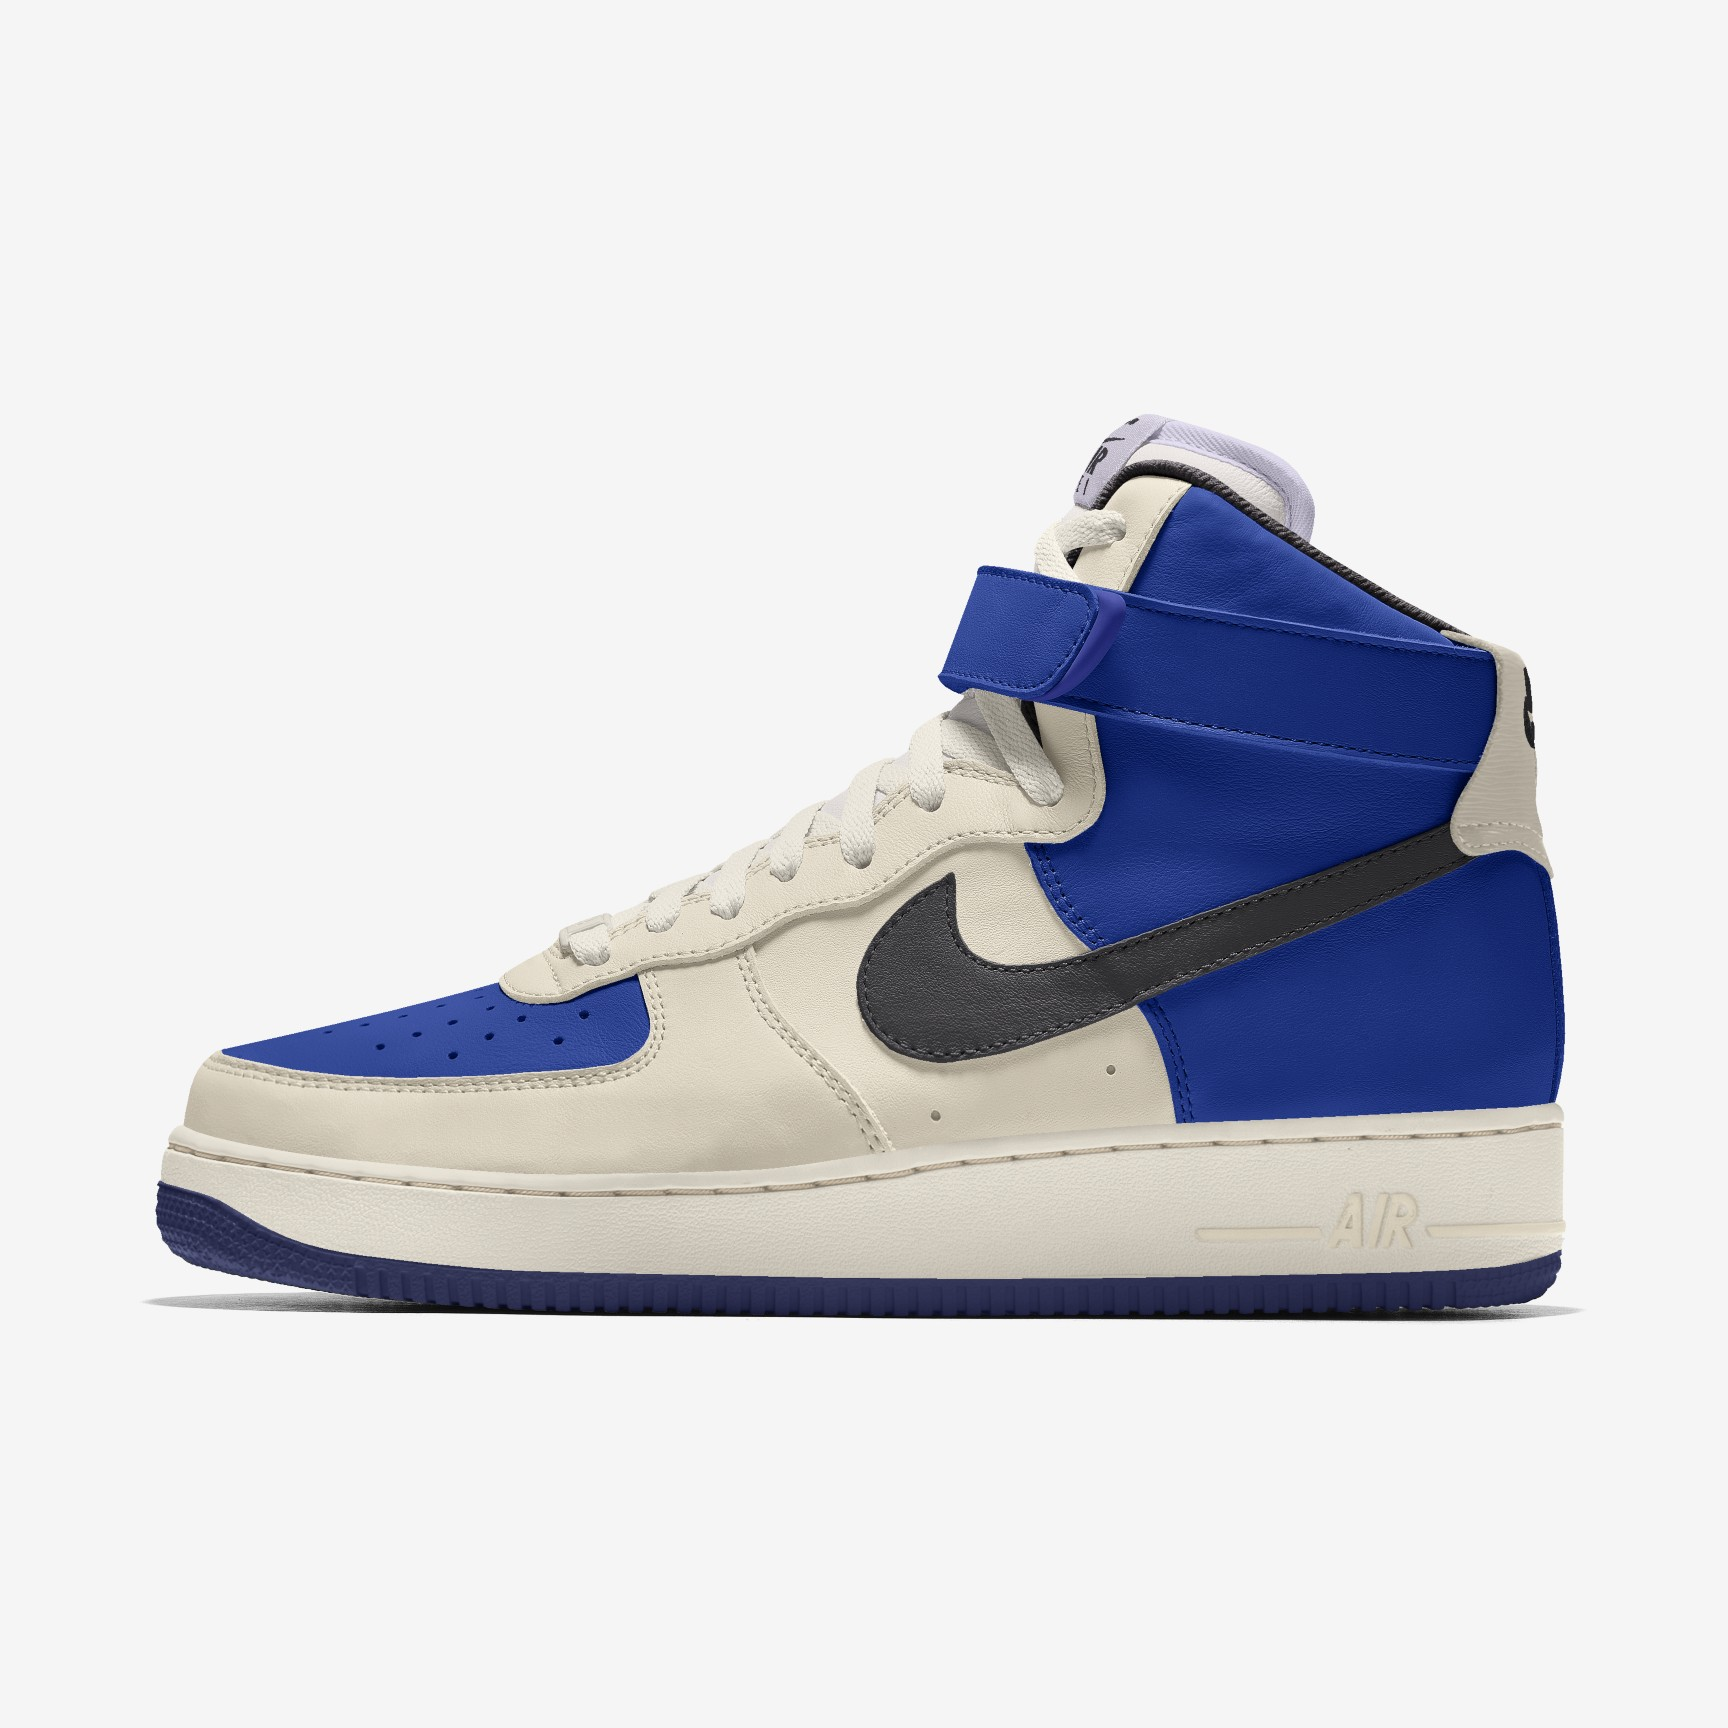 NIKE AIR FORCE 1 HIGH BY YOU X HKR DESIGNED V11.1 ⋆ Hypekickrelease